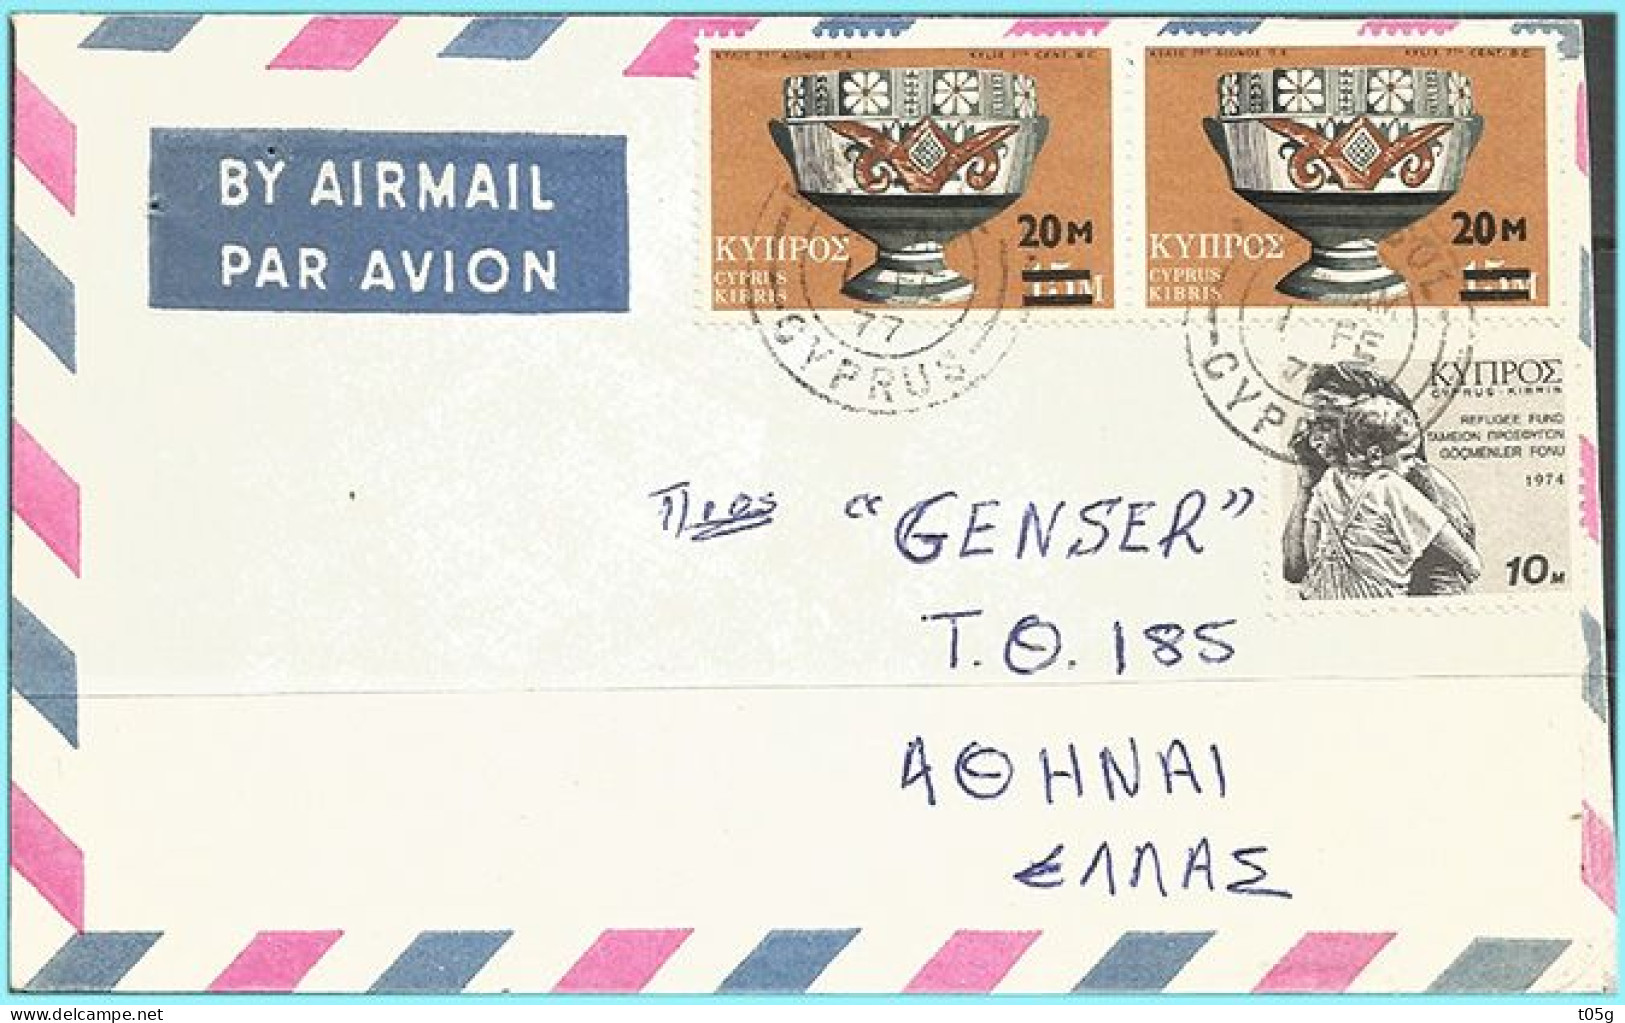 CYPRUS- GREECE- GRECE- HELLAS 1977:  letter From Limassol To Athens - Storia Postale